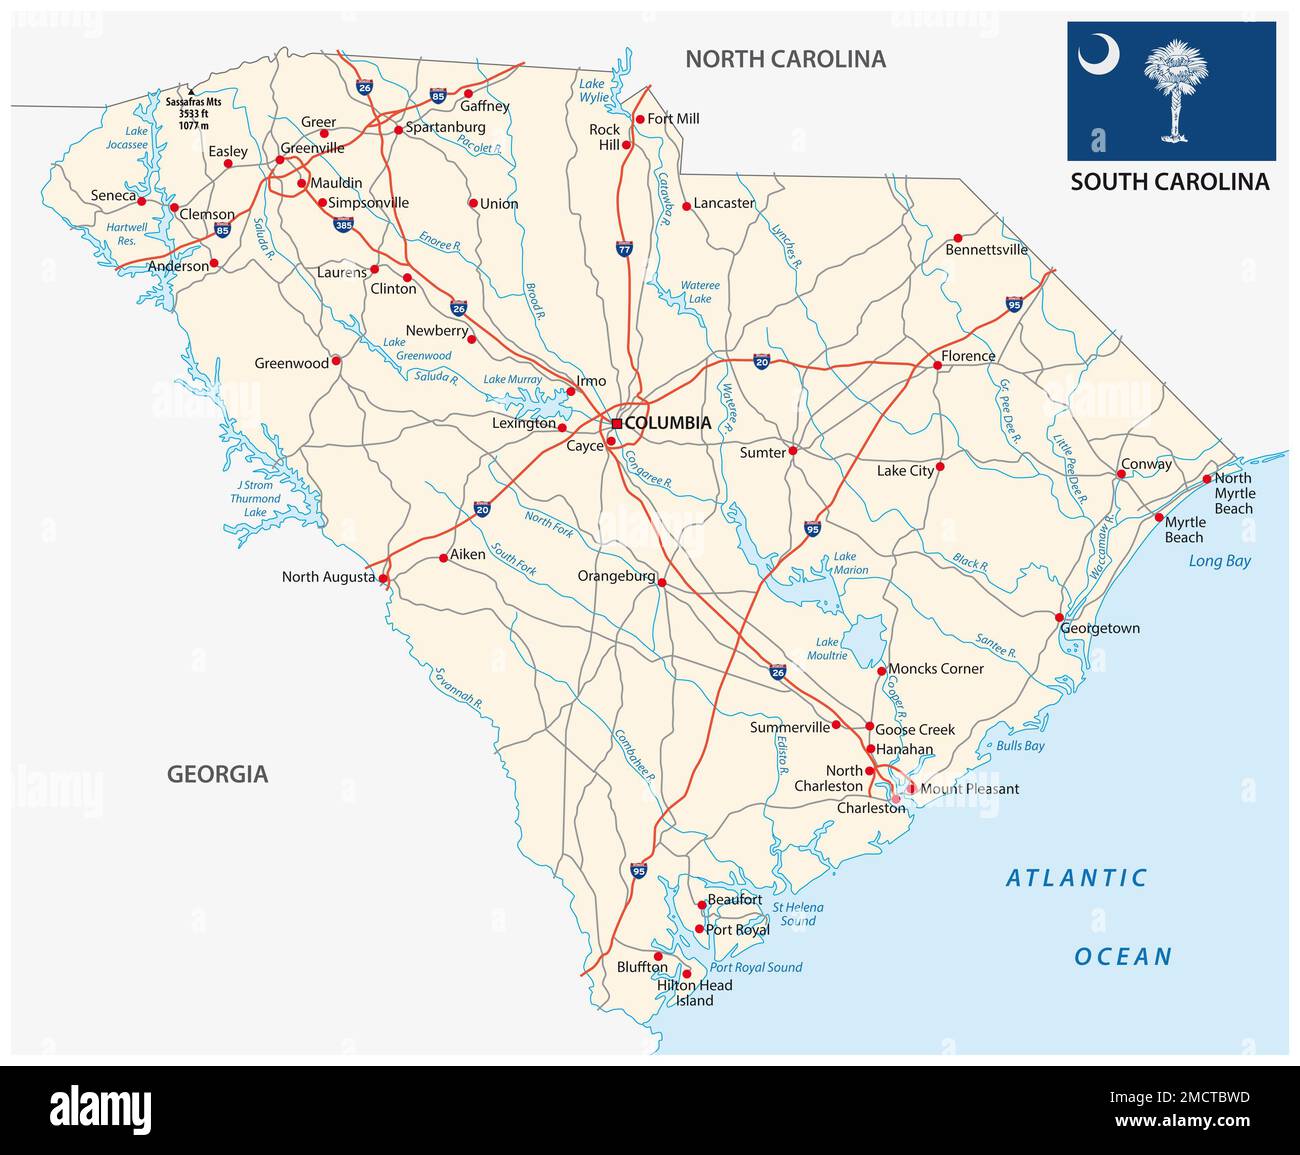 south carolina federal state road vector map with flag Stock Photo